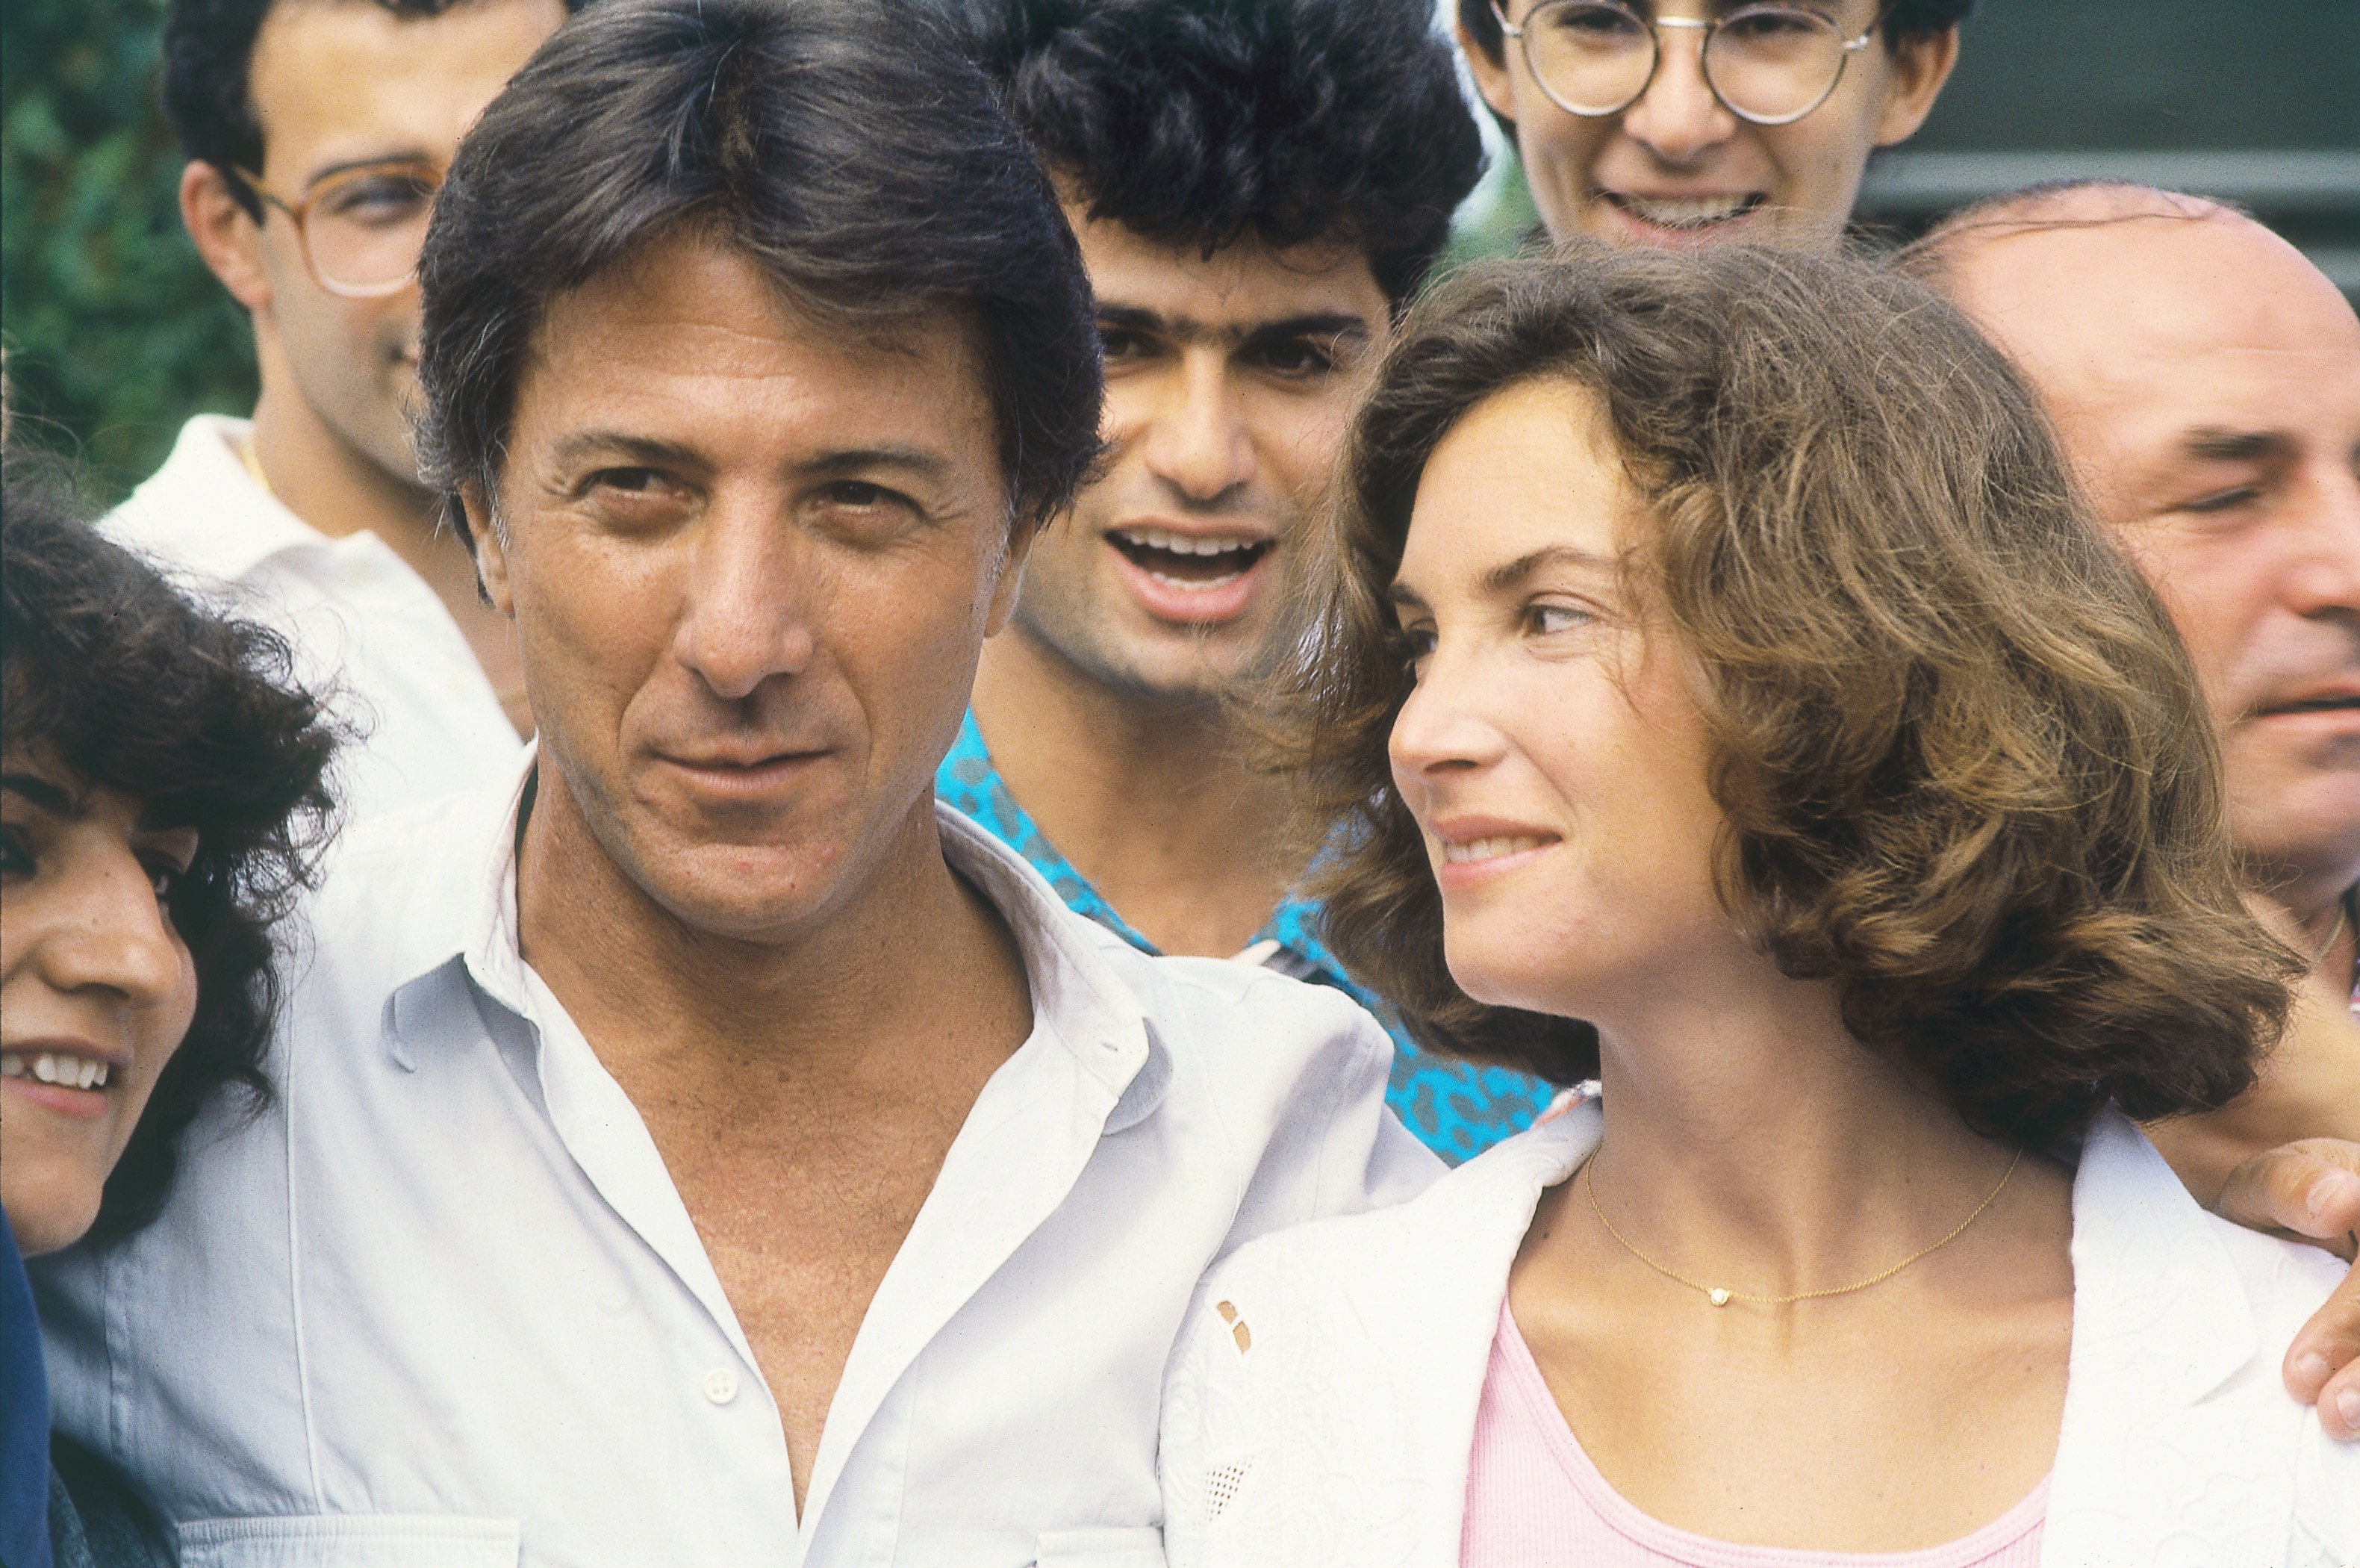 Dustin Hoffman and his wife Lisa Hoffman in the 1980s | Source: Getty Images